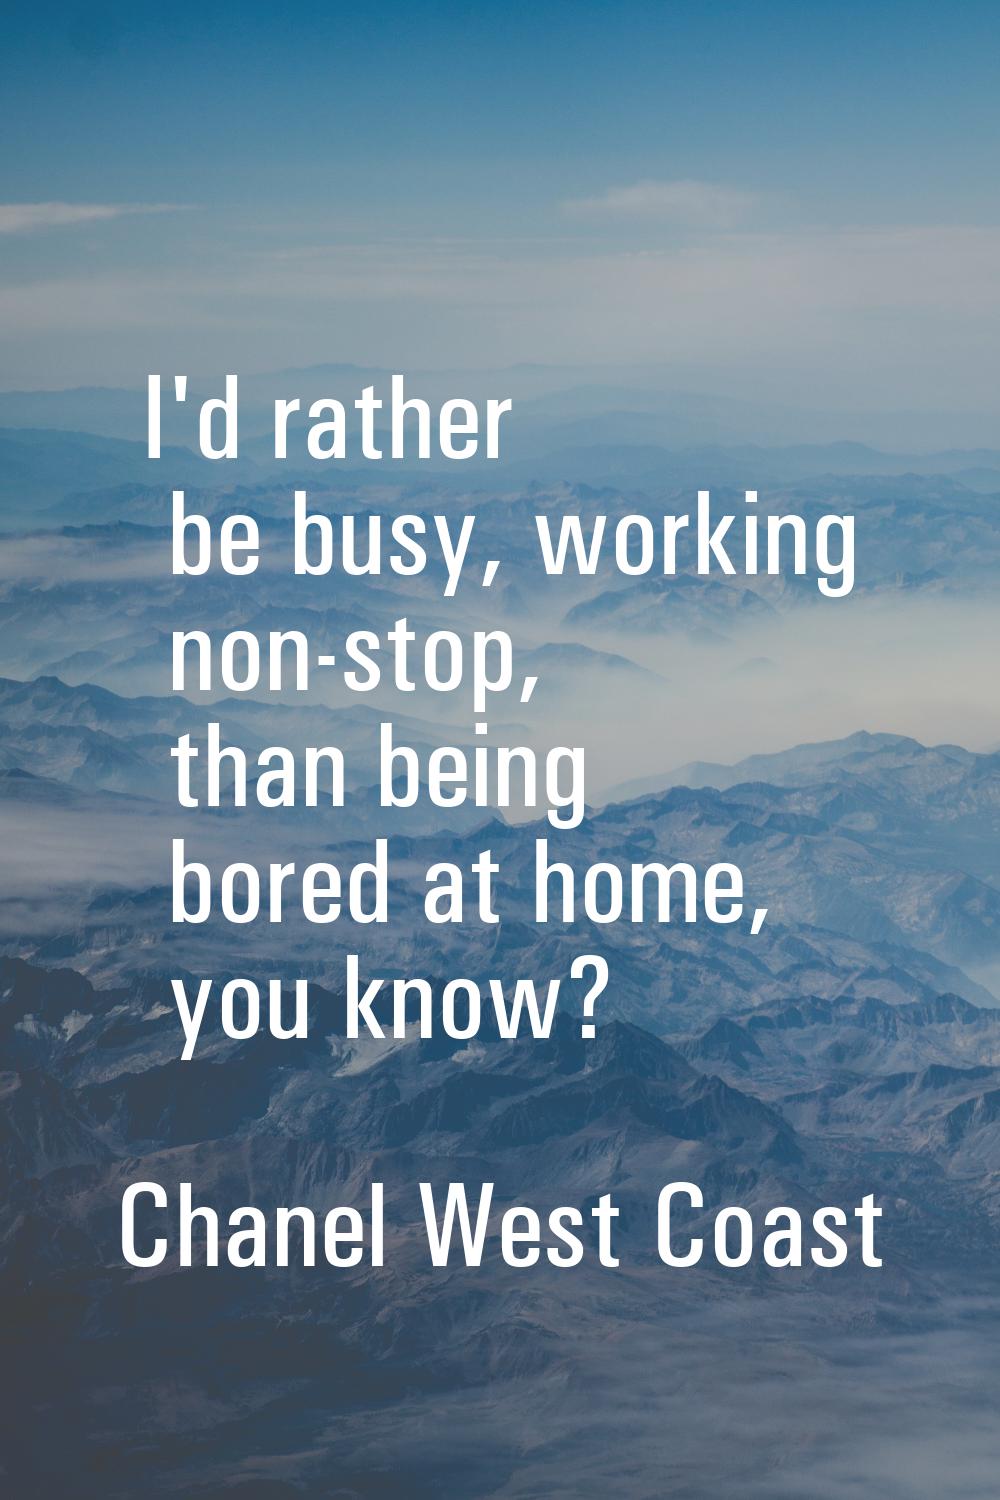 I'd rather be busy, working non-stop, than being bored at home, you know?